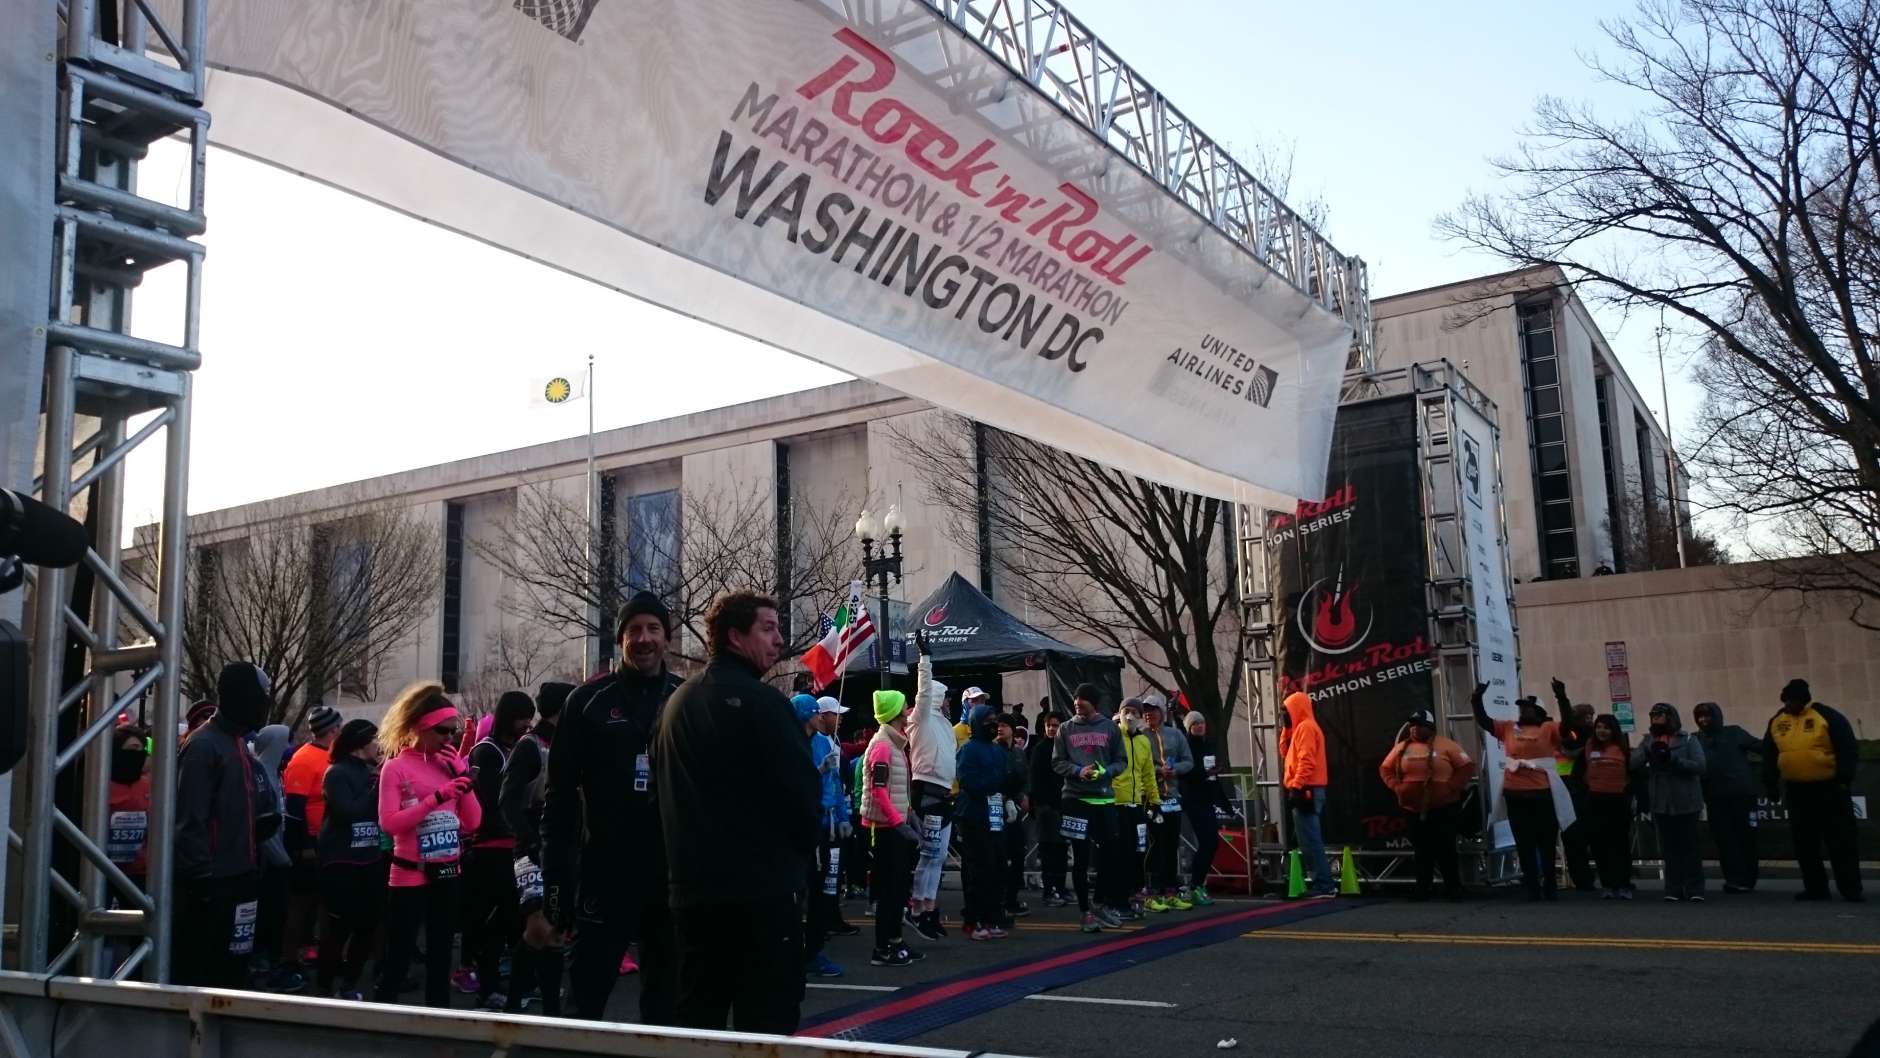 Participants gather at the starting line of the 2017 Rock 'n' Roll Marathon Saturday morning, March 11, on Constitution Ave. NW. (WTOP/Dennis Foley)